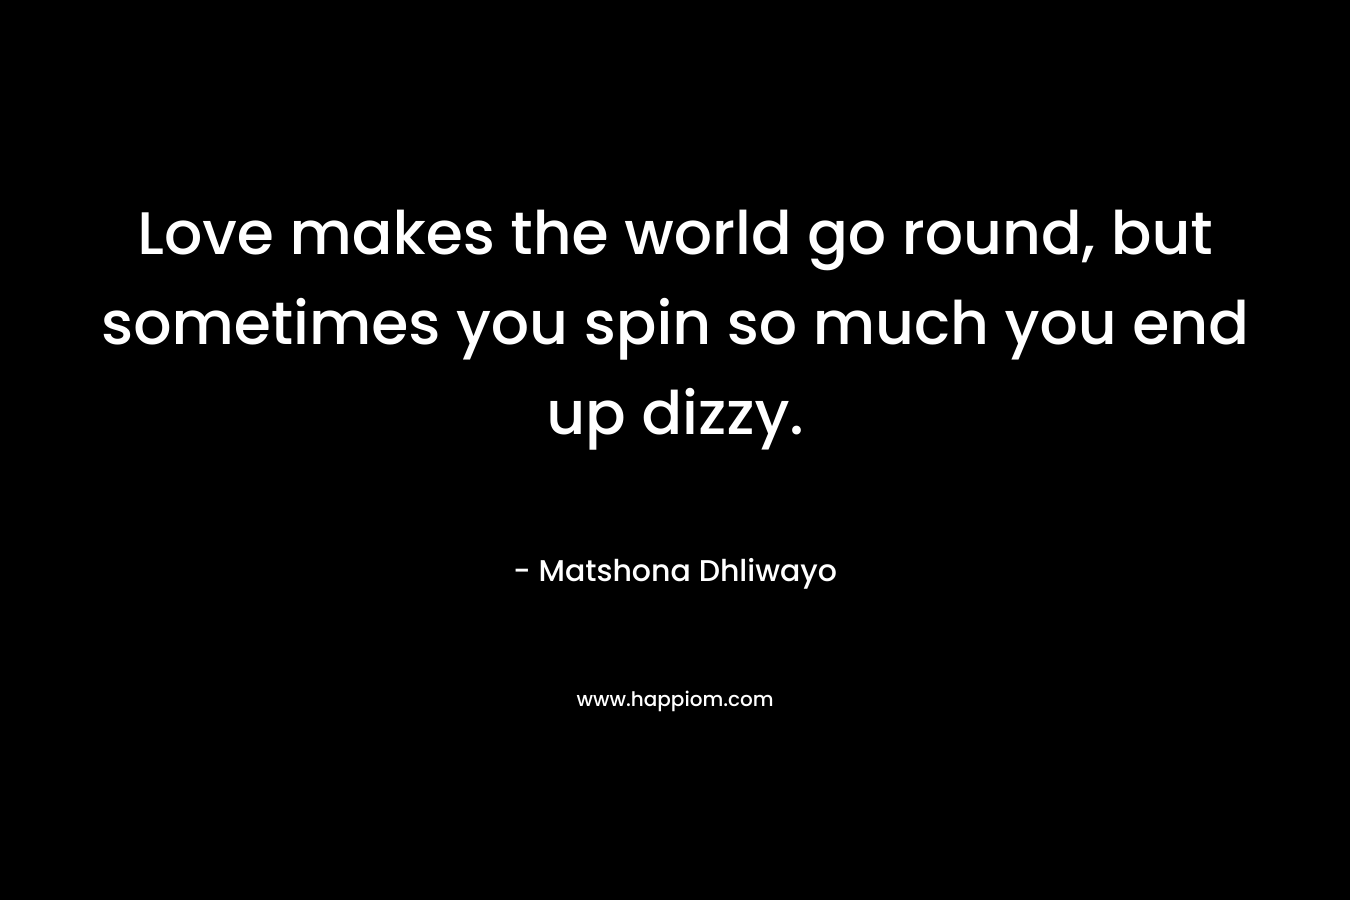 Love makes the world go round, but sometimes you spin so much you end up dizzy.